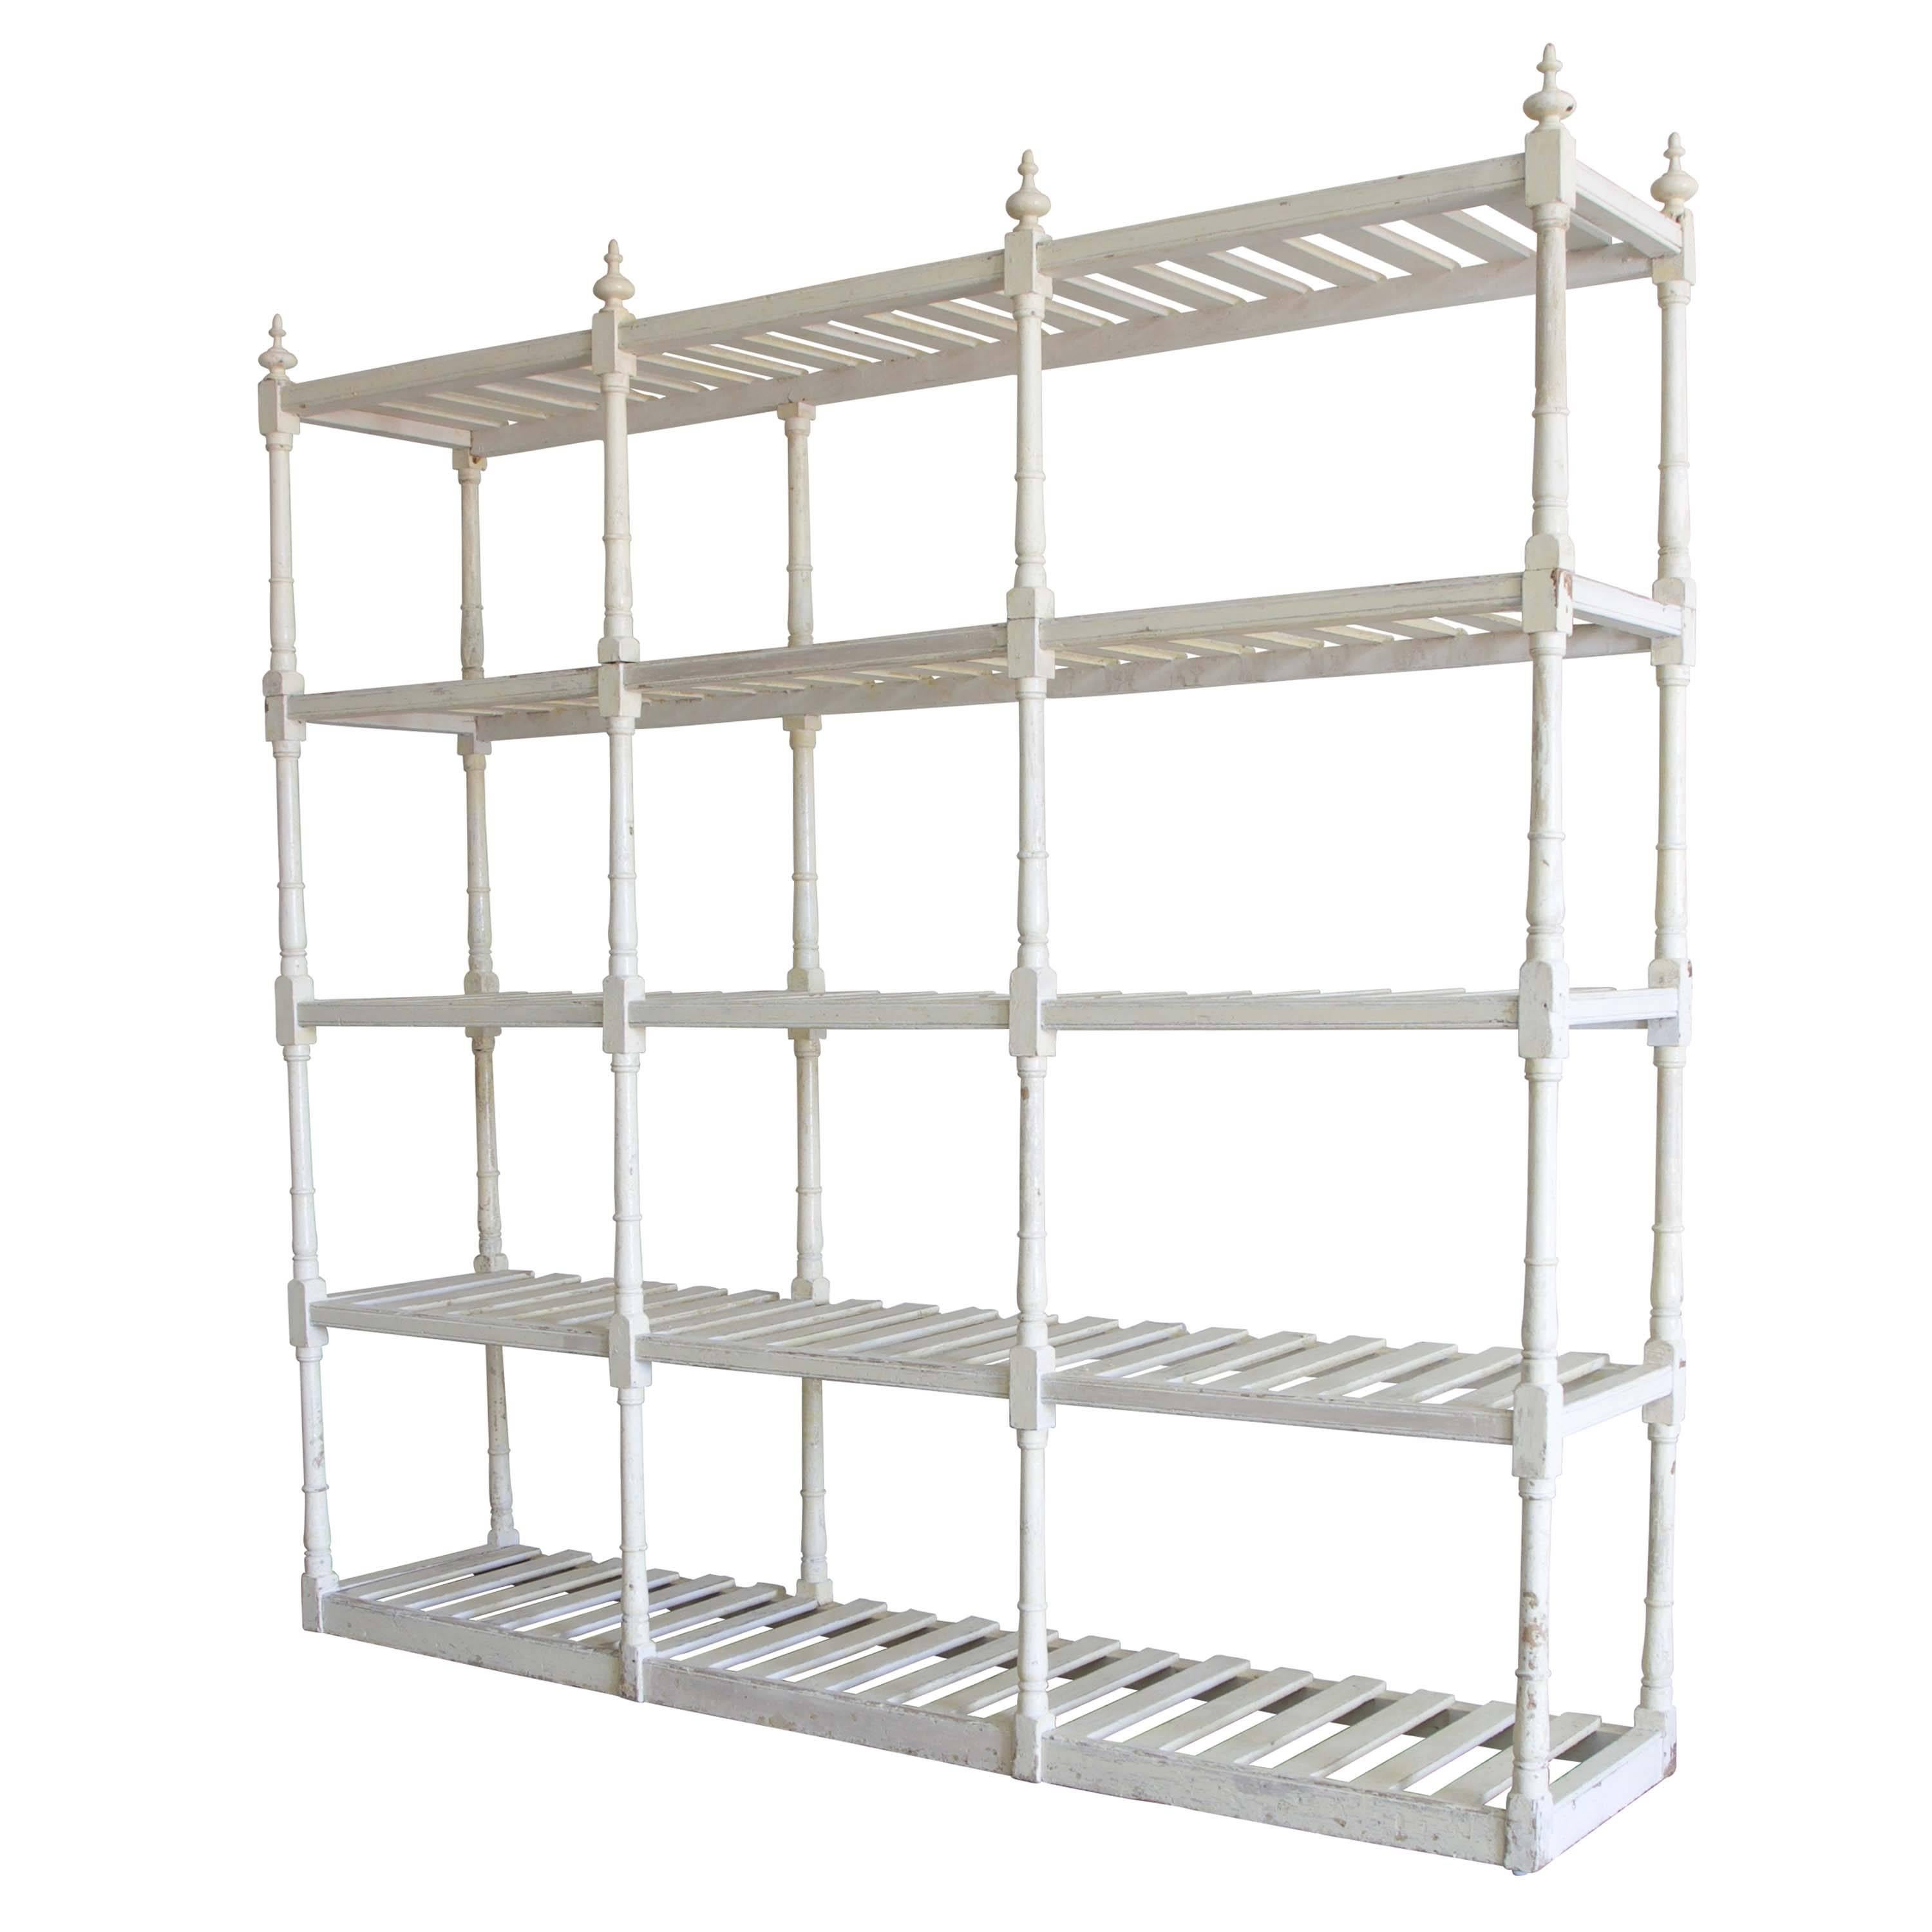 A large English country house linen rack retaining its historic painted finish. England, circa 1850. Top shelf can be removed for ease of transport. Price in exclusive of VAT.